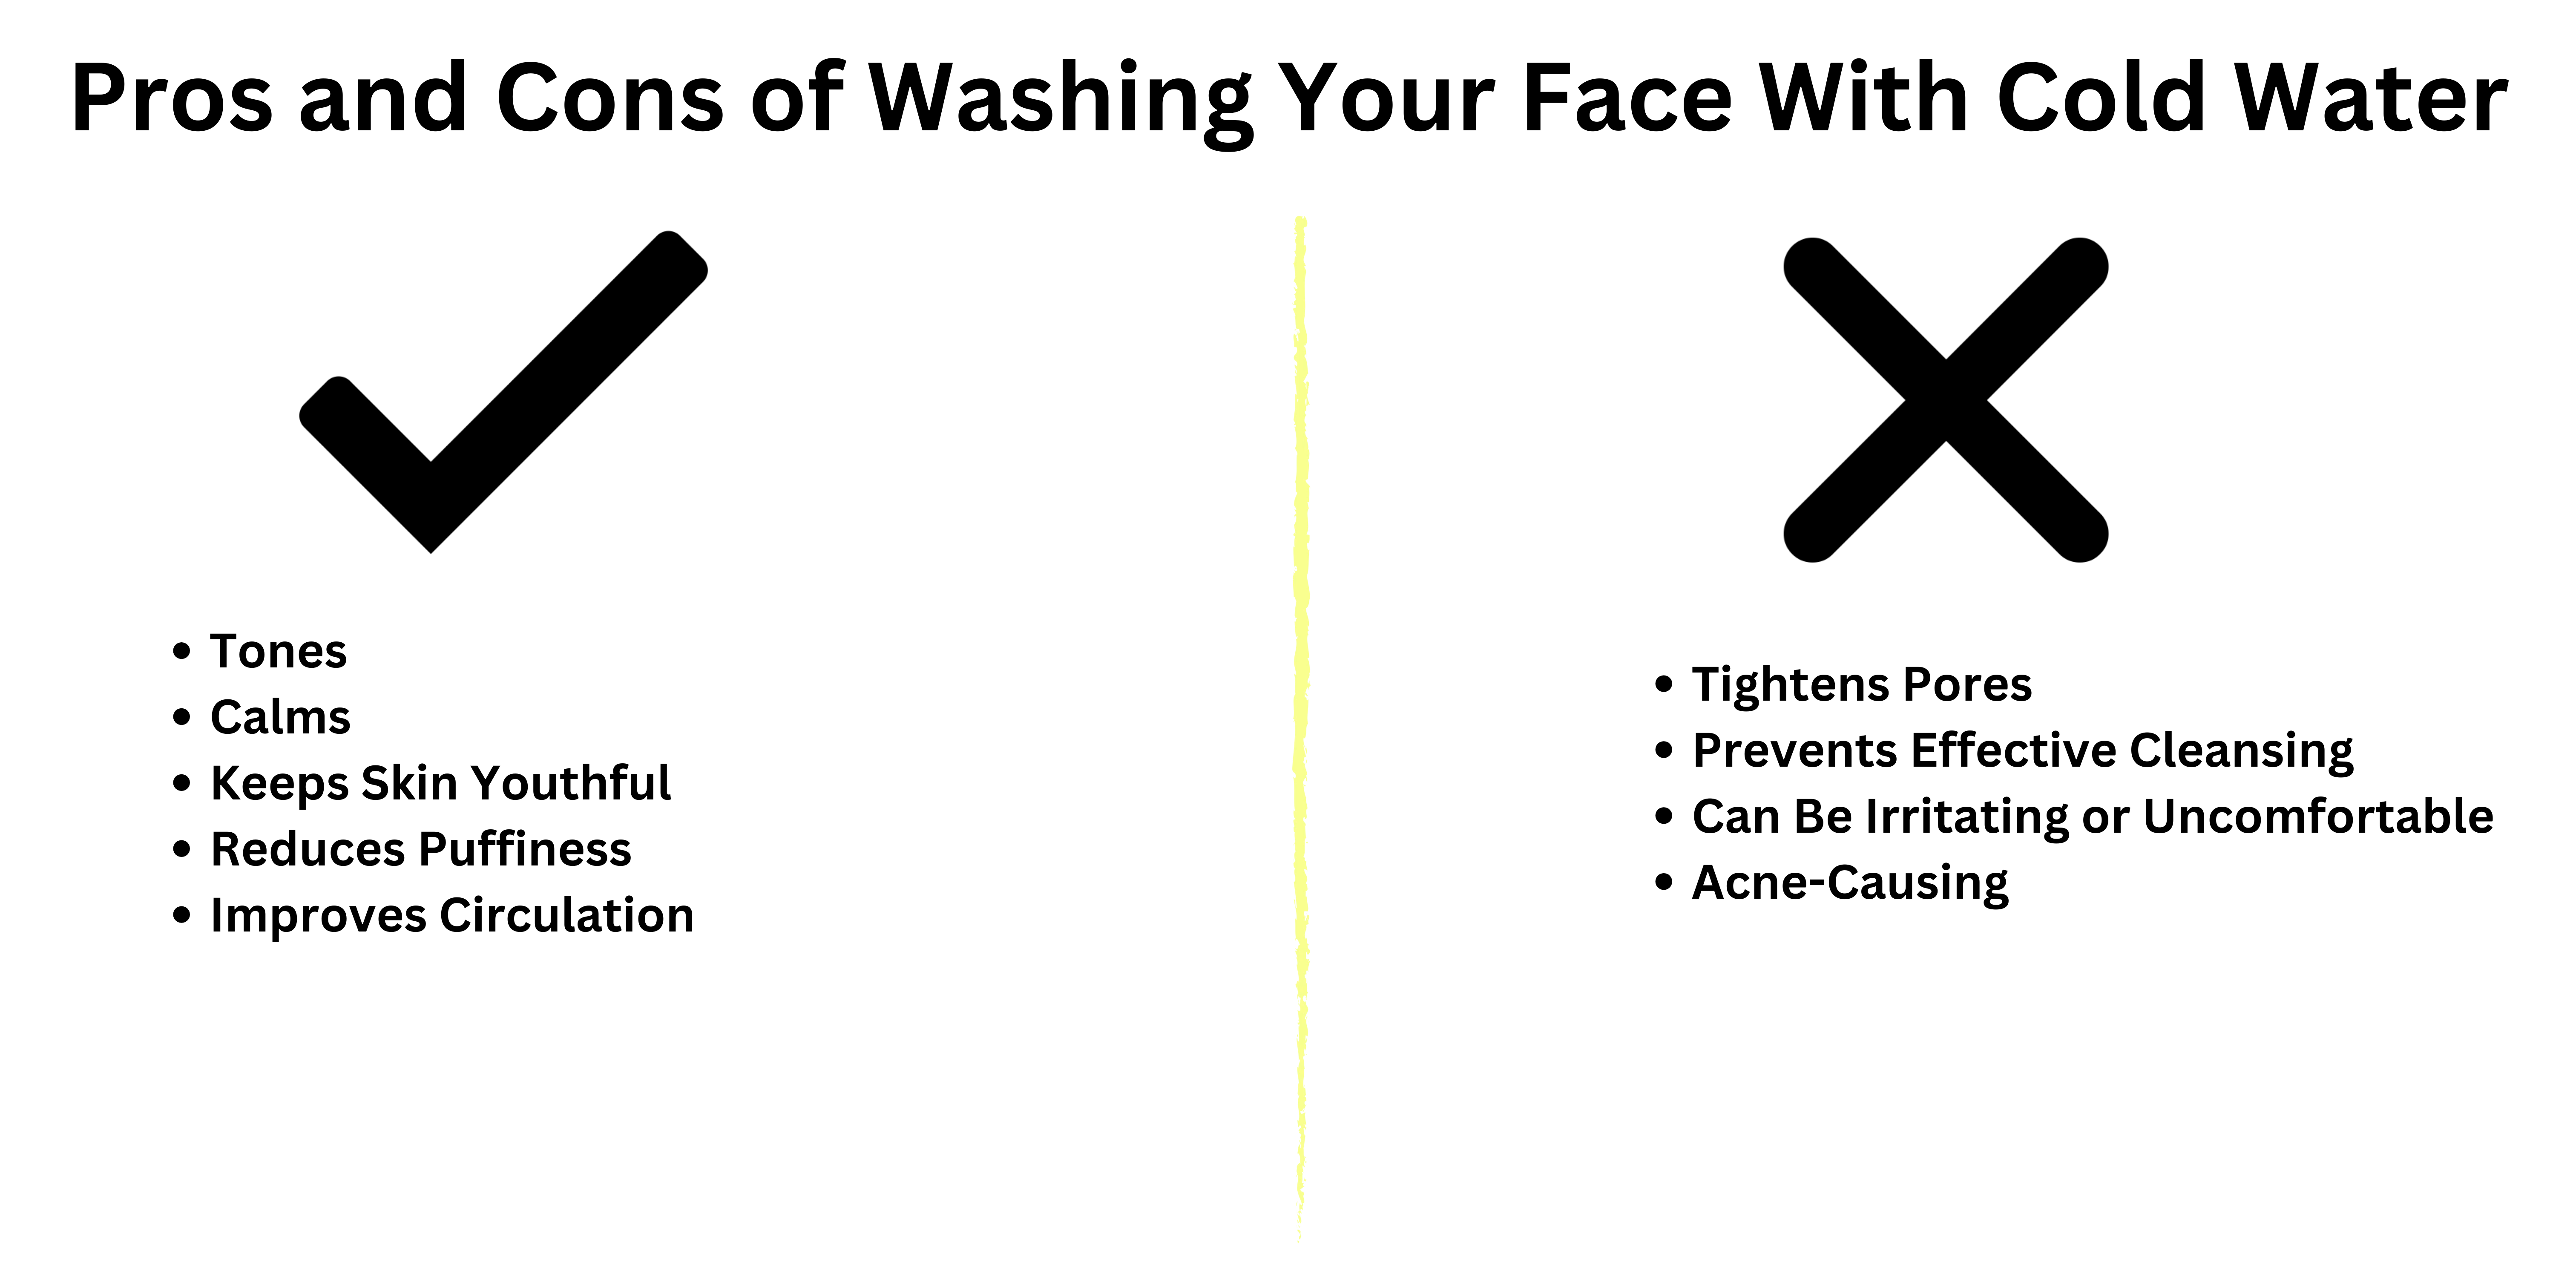 Is it good to wash your face with cold water? What does cleansing with hot water do to your skin?